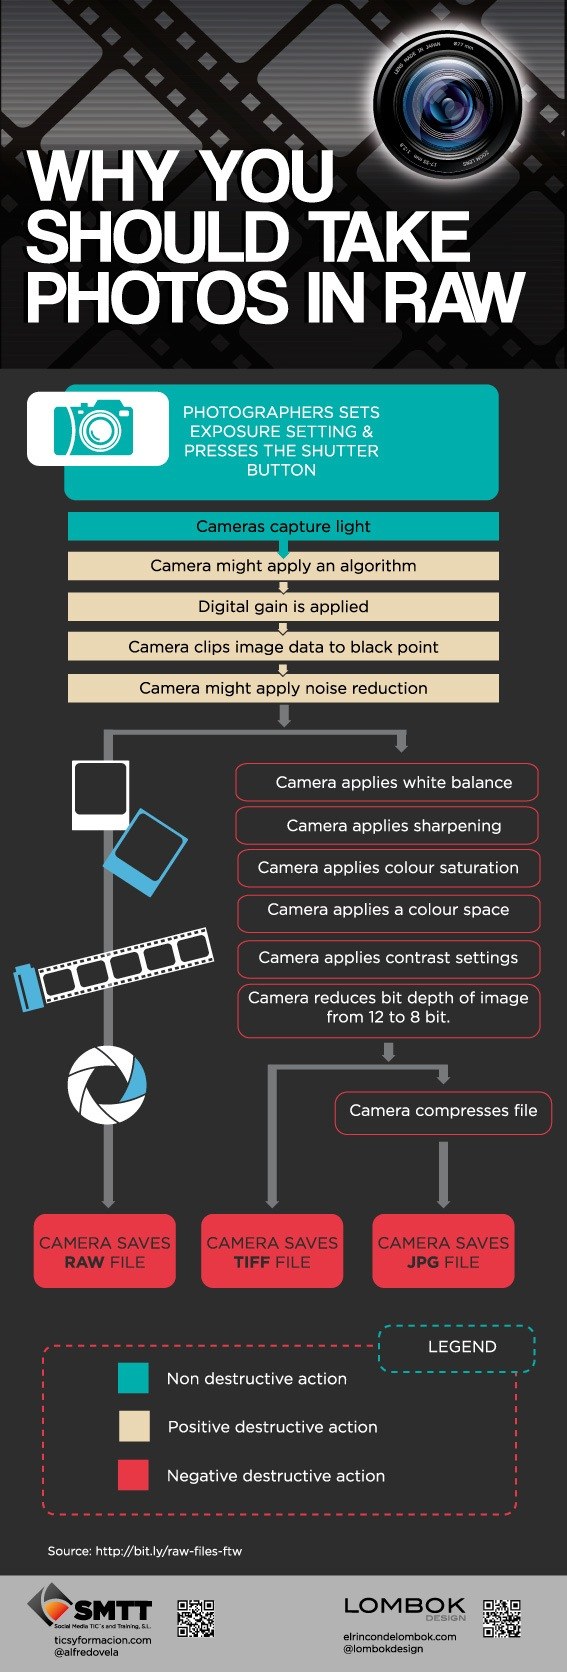 80 Interesting Photography Facts Thatll Make You Go "Snap!"